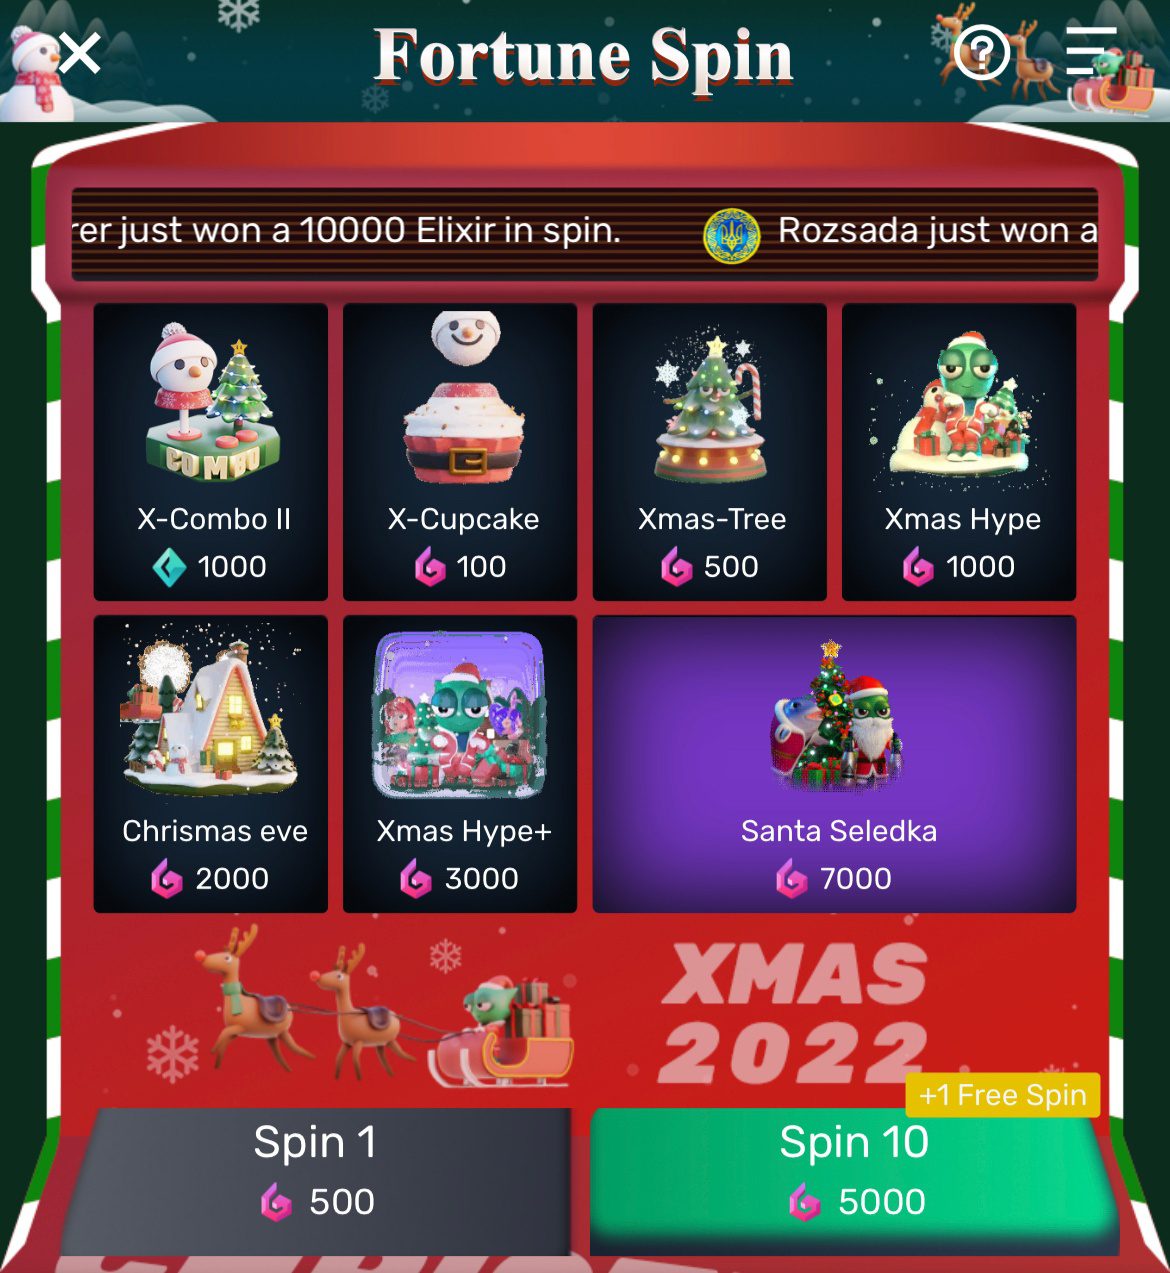 Fortune spin